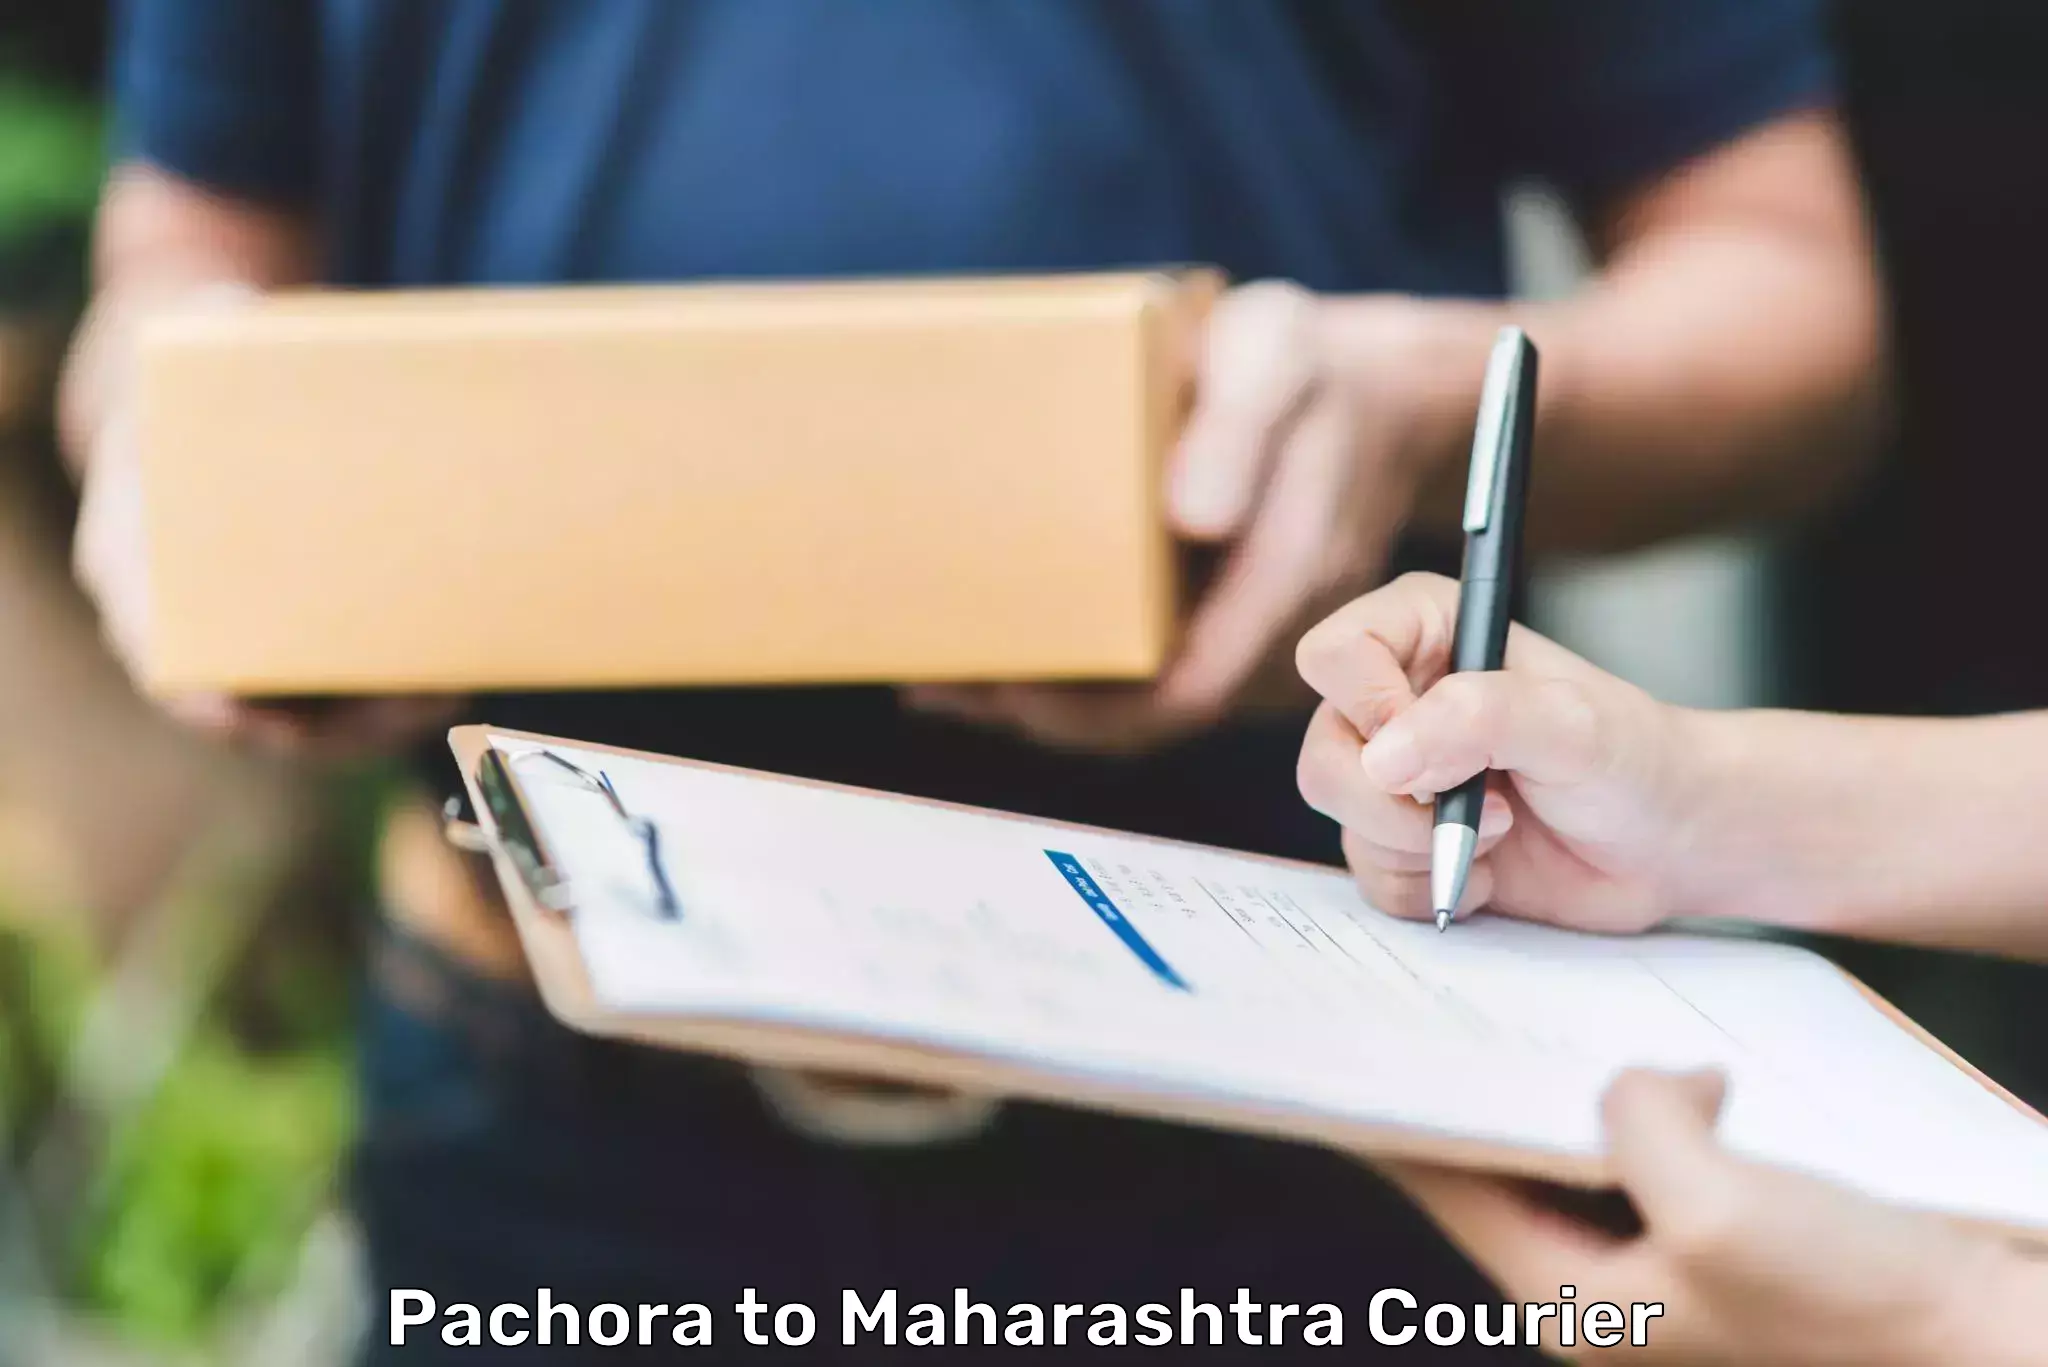 State-of-the-art courier technology Pachora to Pimpri Chinchwad